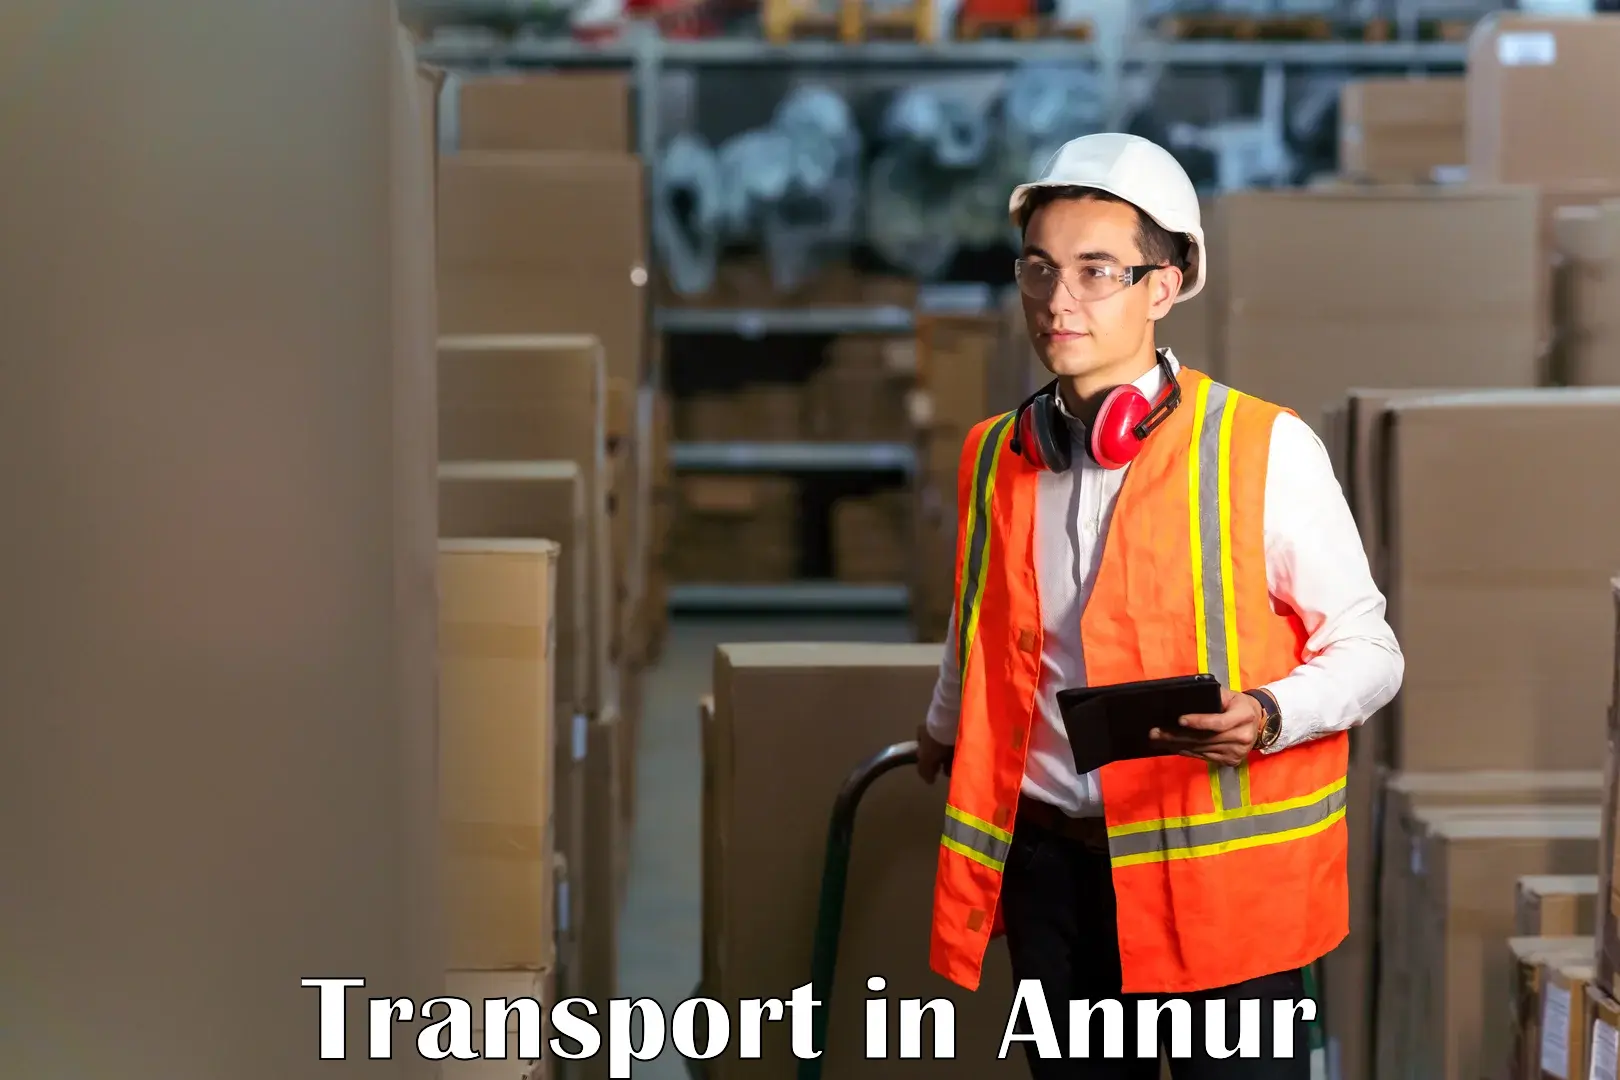 Delivery service in Annur